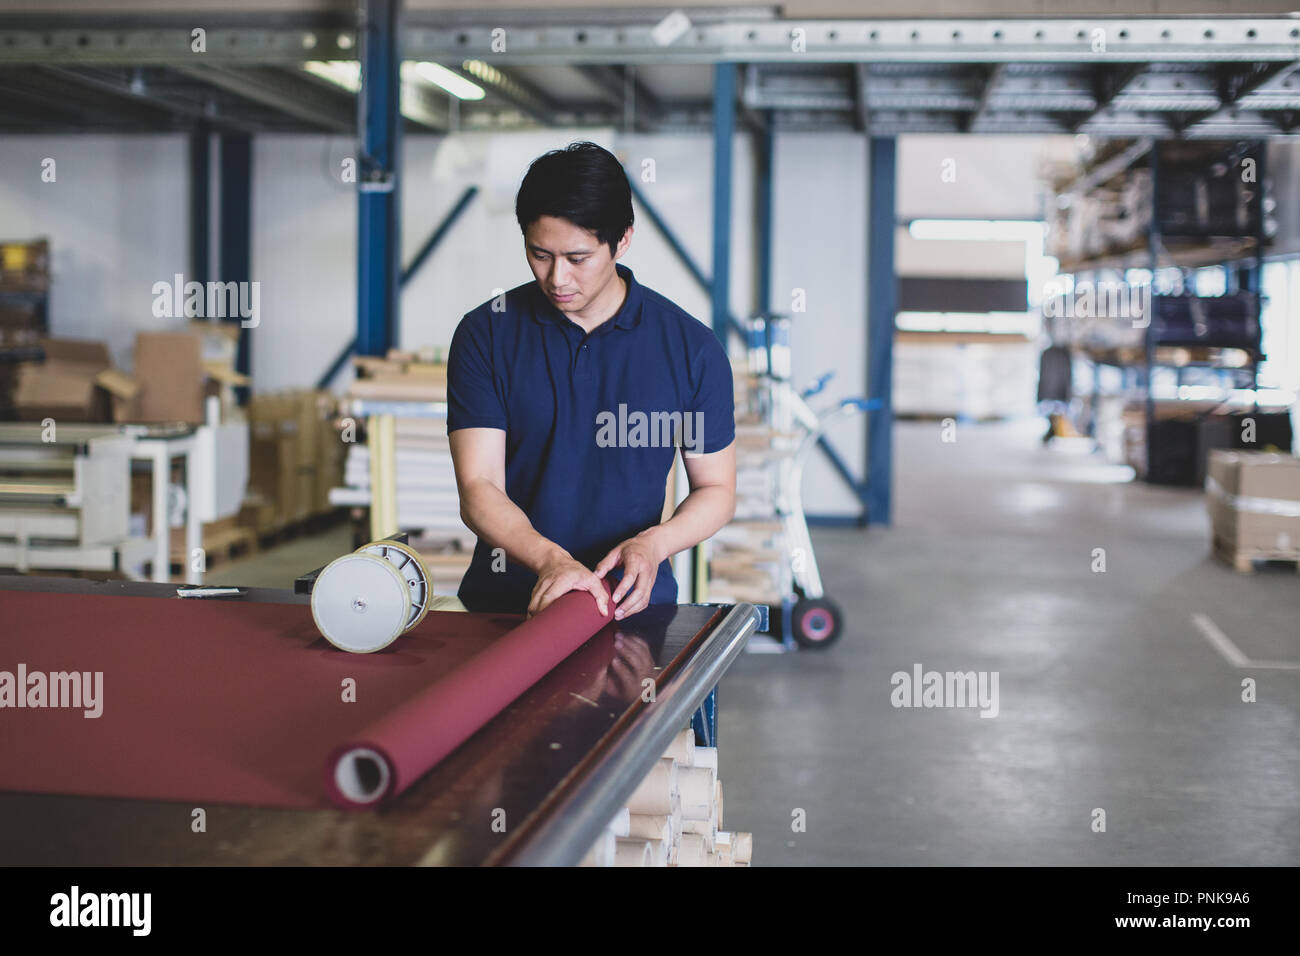 Male cutting fabric in a manufacturing warehouse Stock Photo